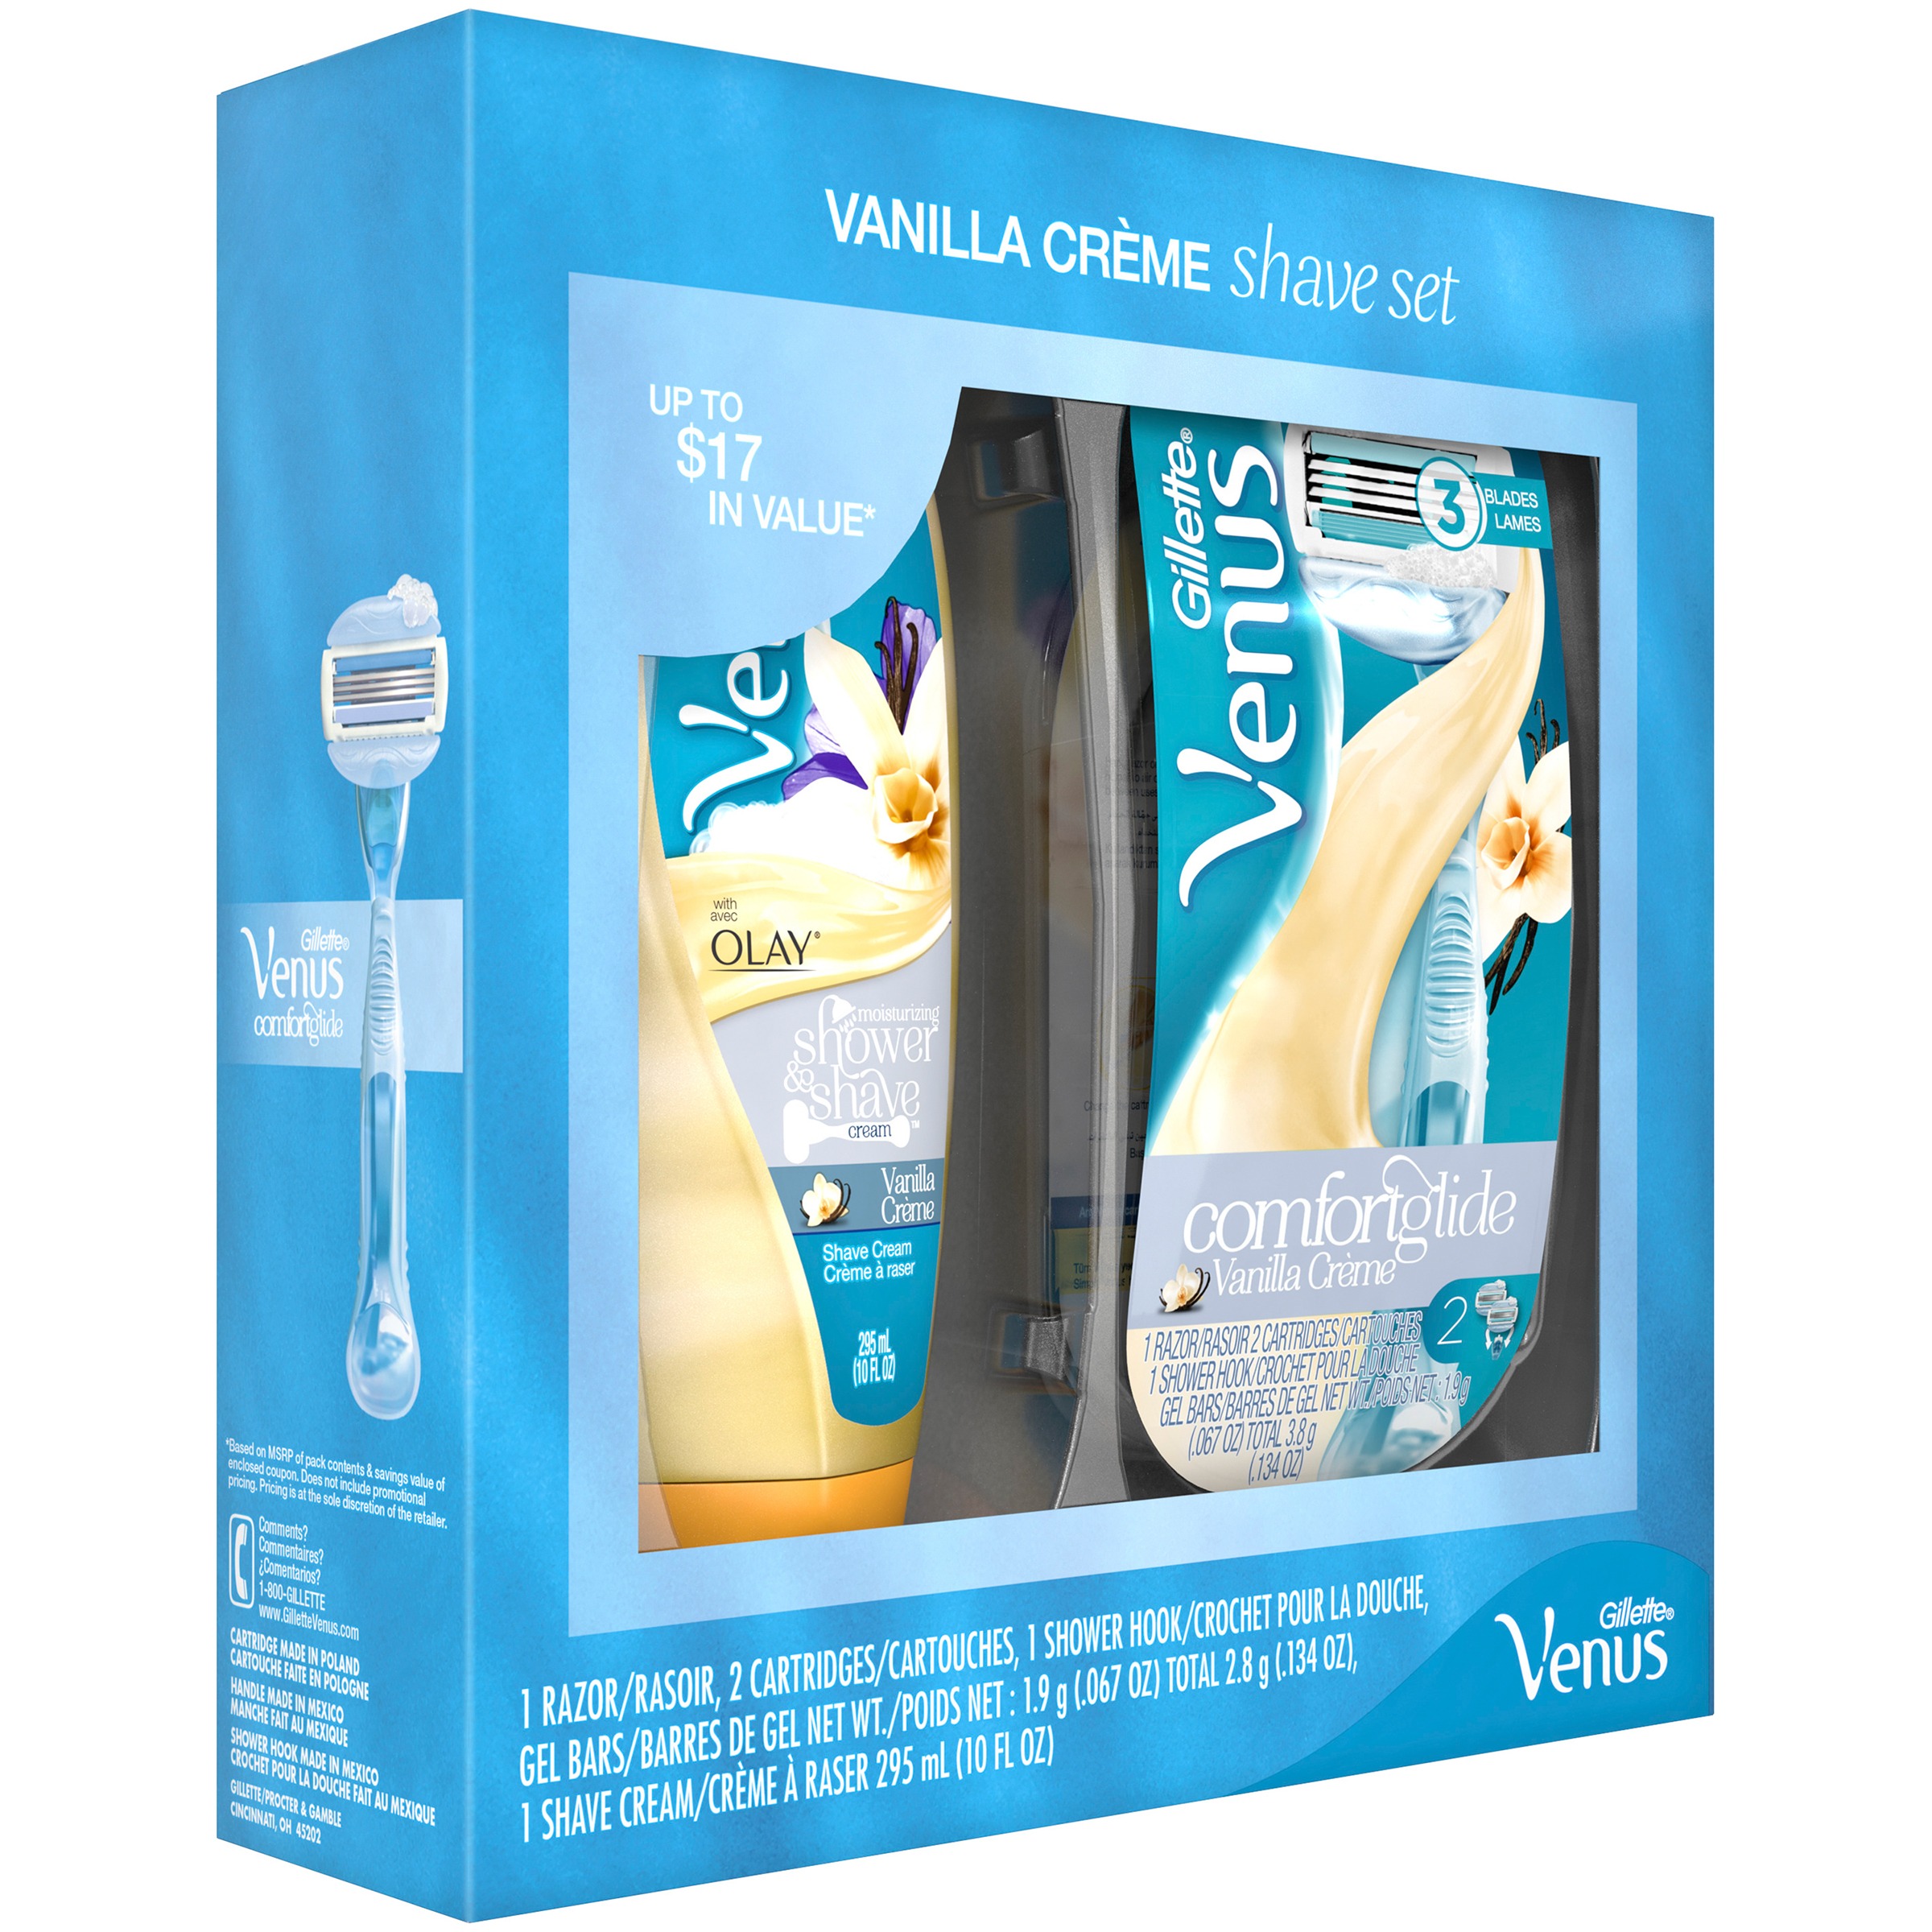 Gillette Venus and Olay Vanilla Crme Female Shave Gift Set - image 2 of 3